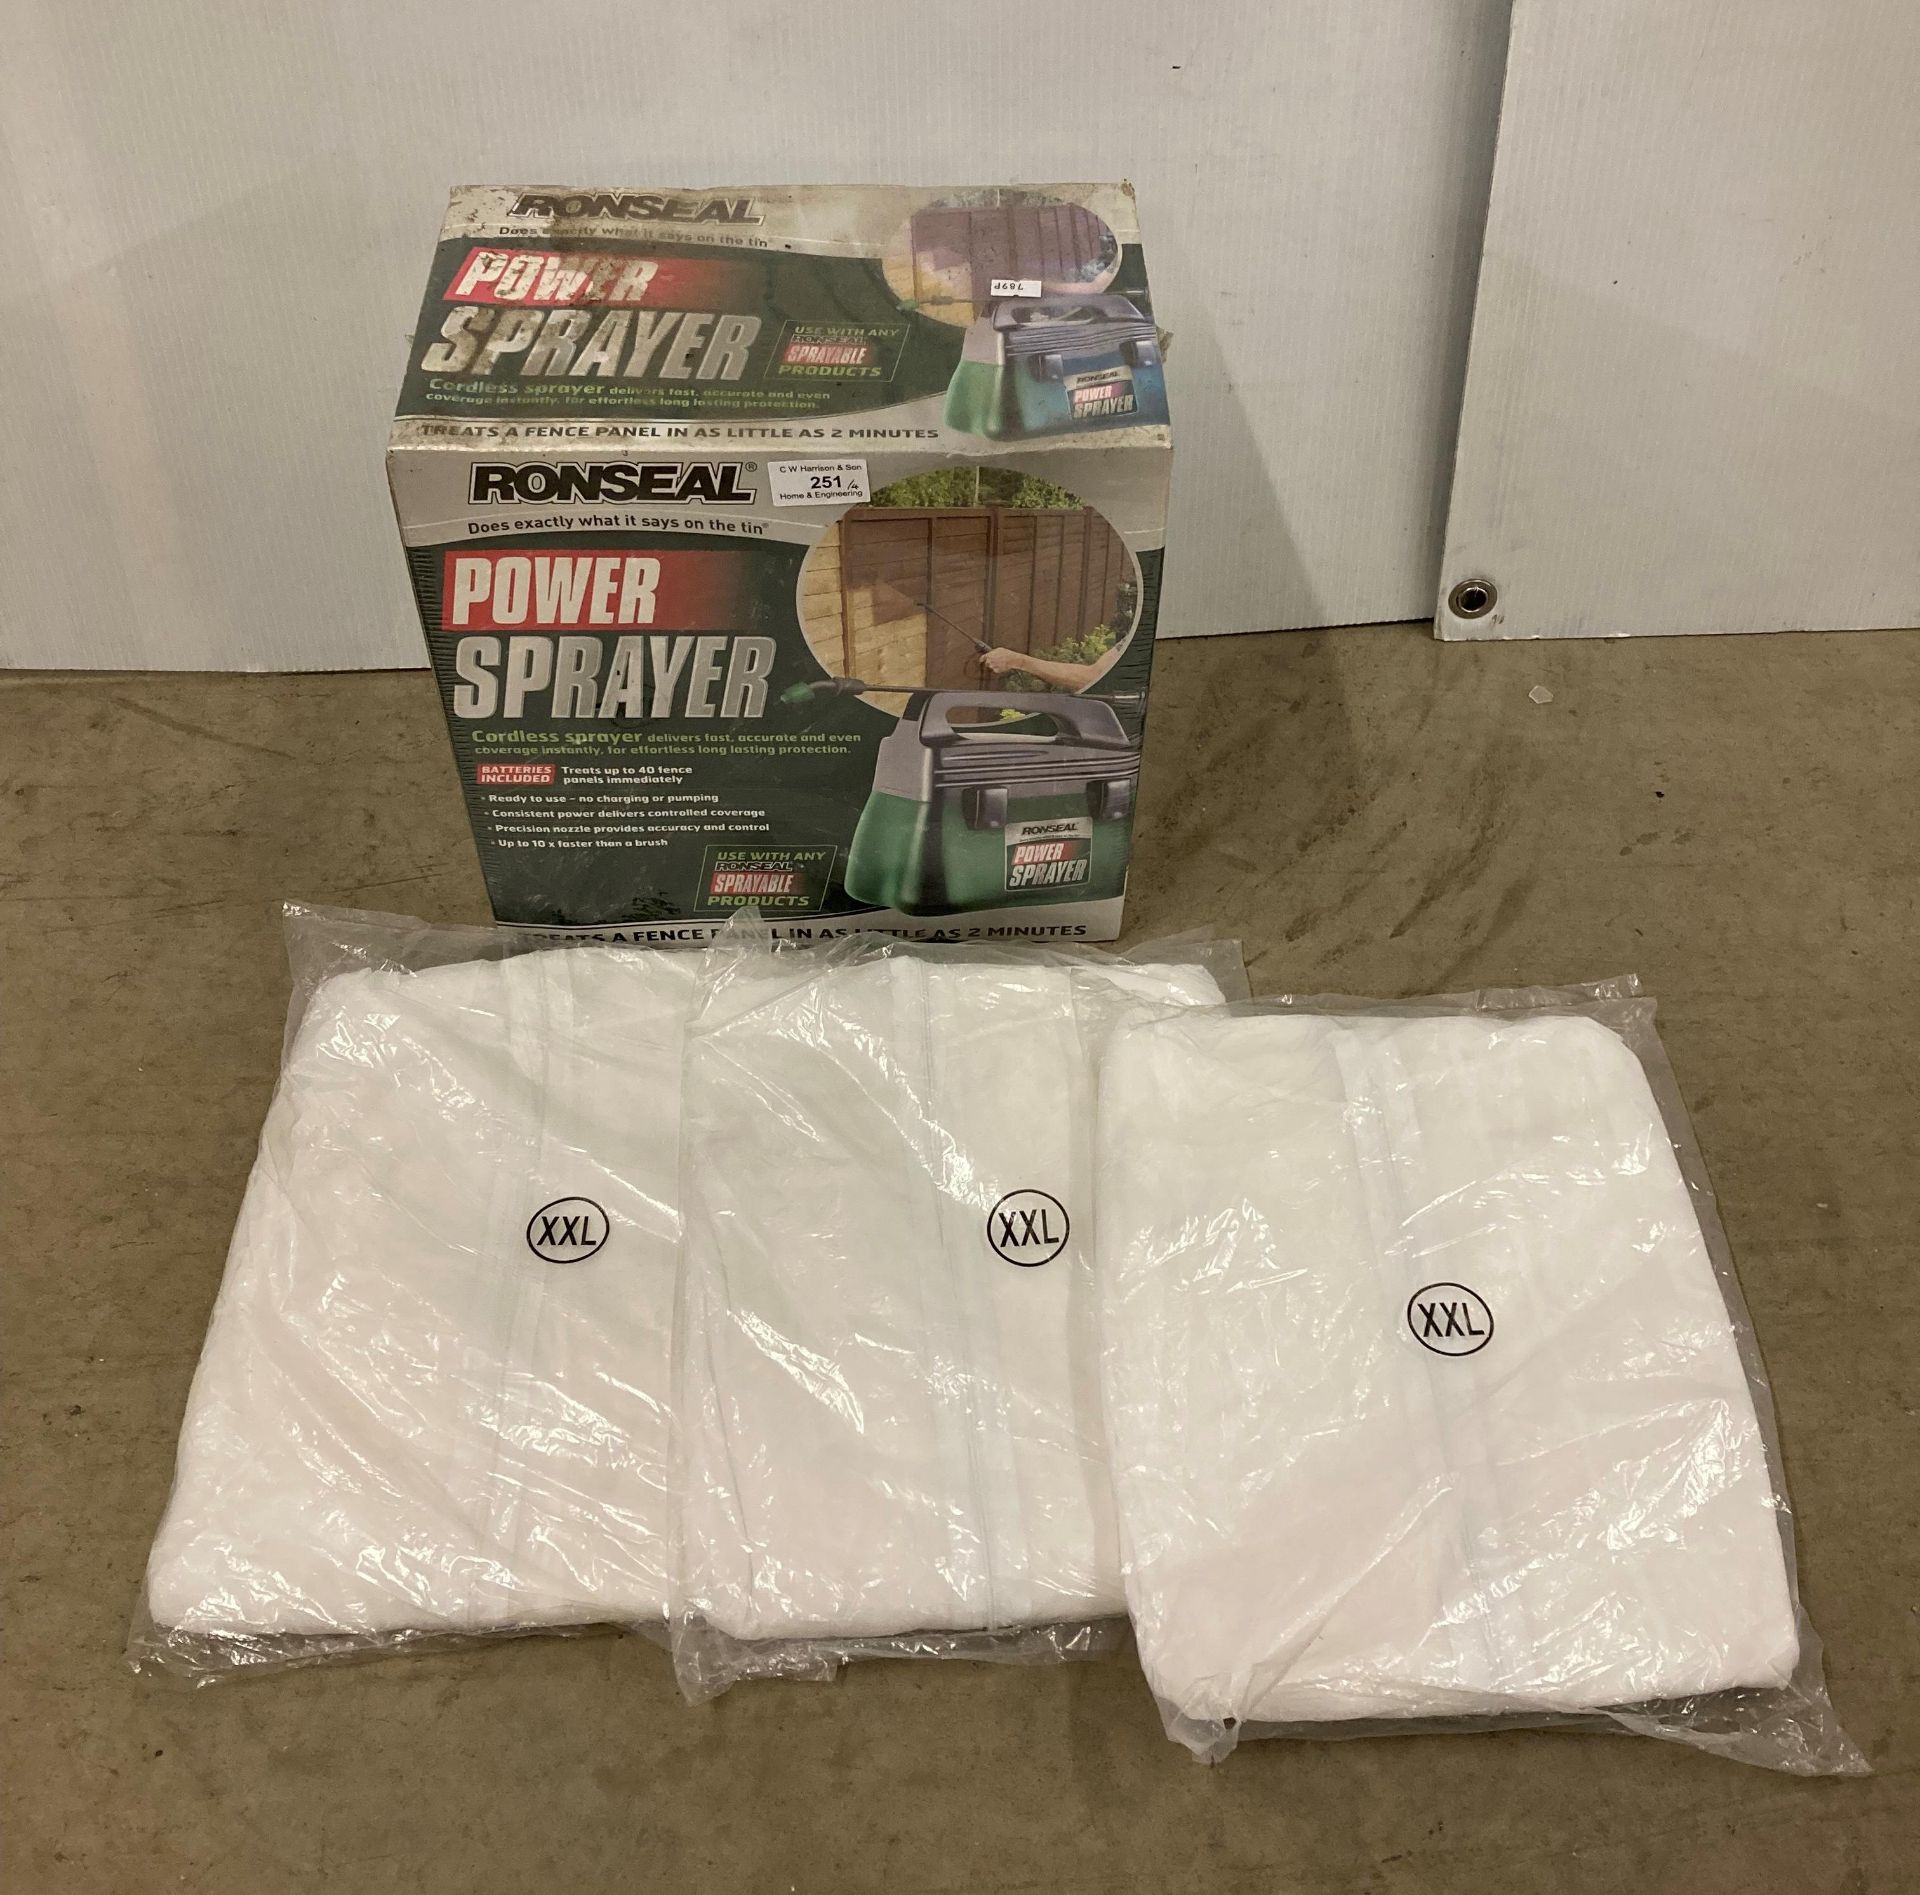 Ronseal power sprayer battery operated, new in box and three x white painting suits,